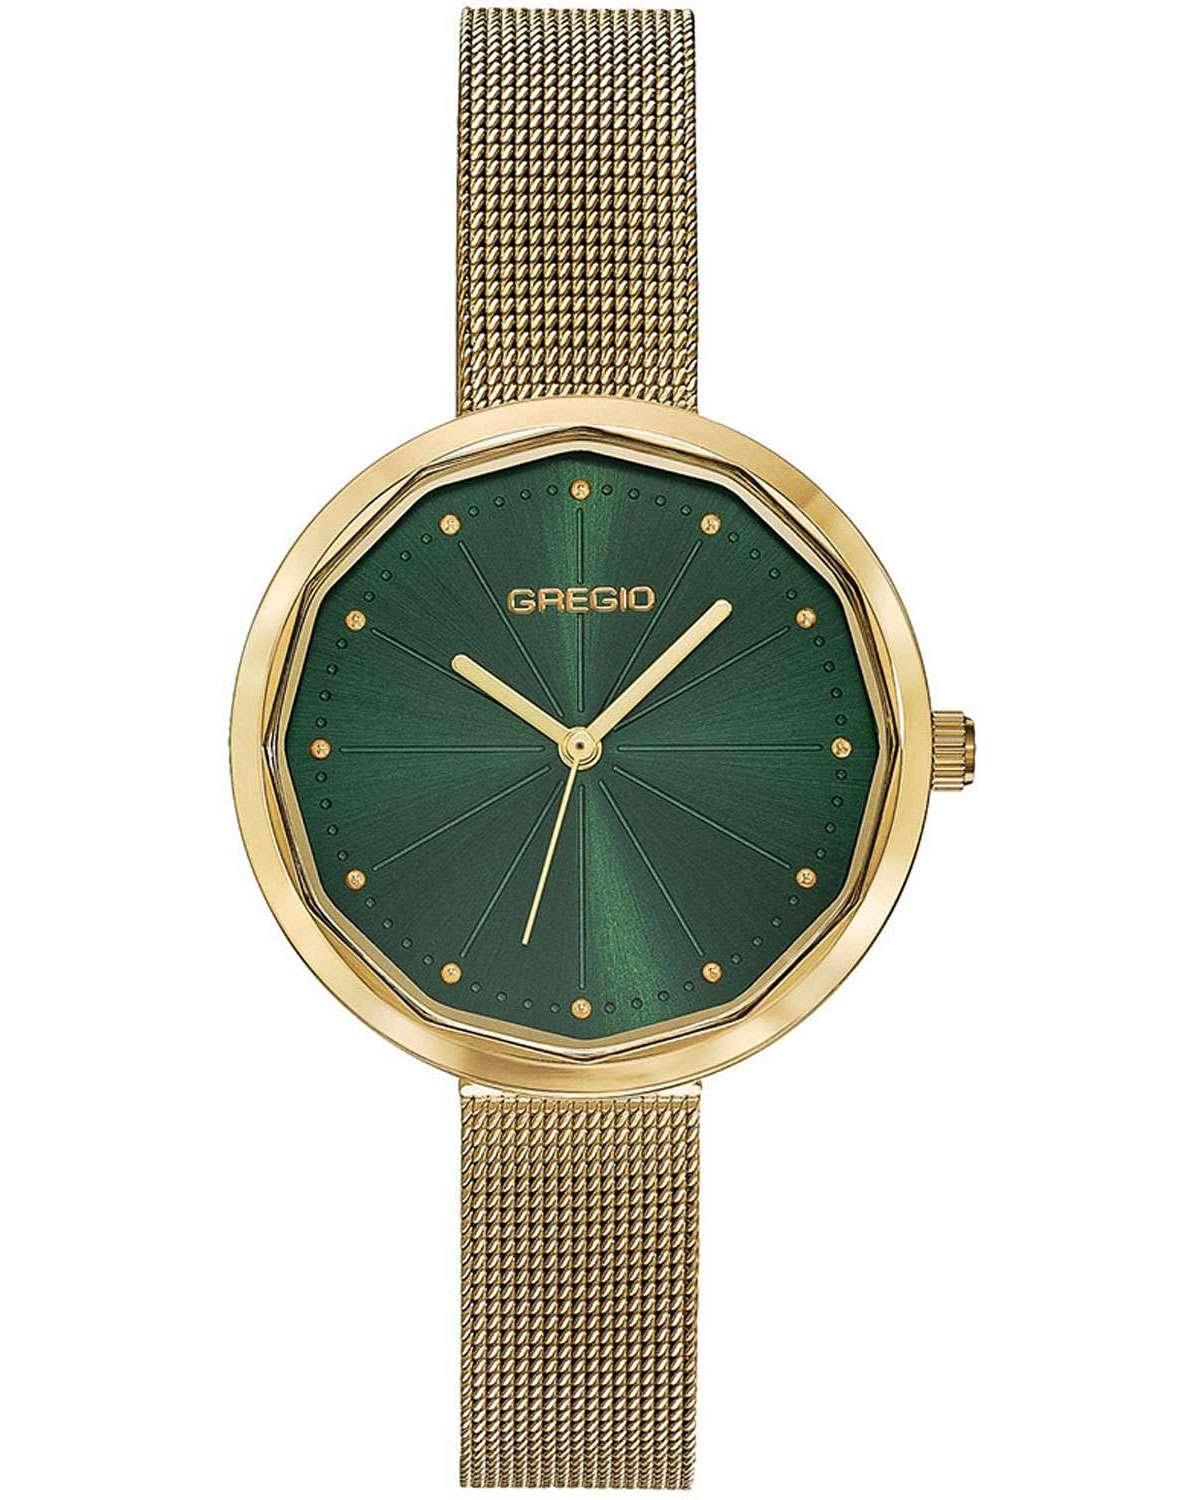 gregio urban gr460021 gold case with stainless steel bracelet image1